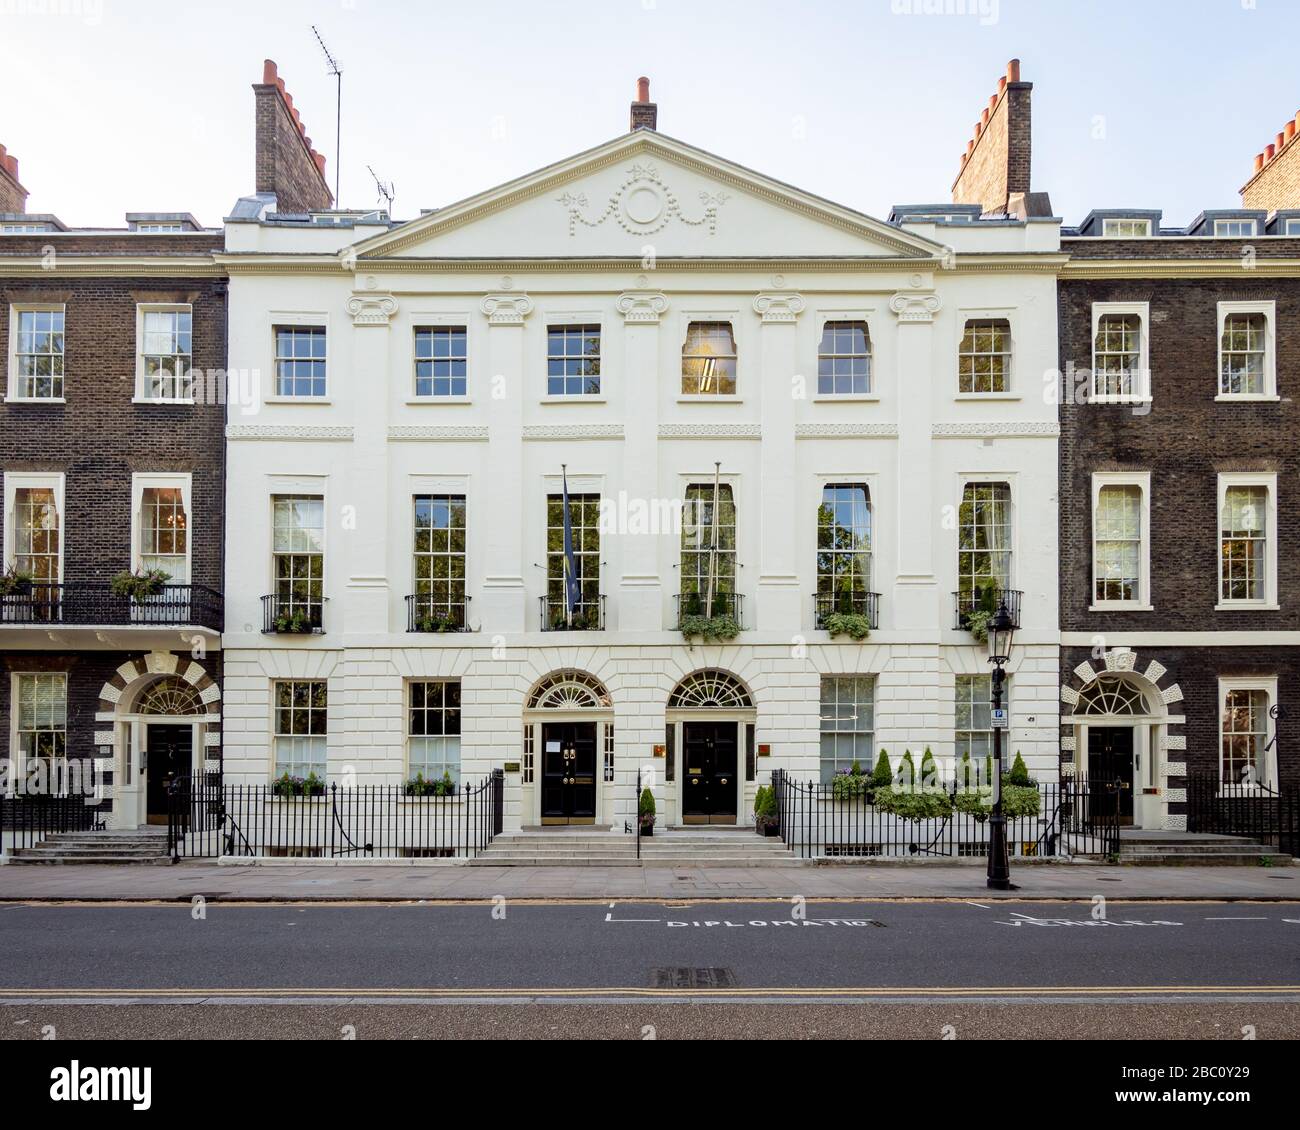 The Georgian architecture façade to the New College of the Humanities situated in Bedford Square, London. Stock Photo